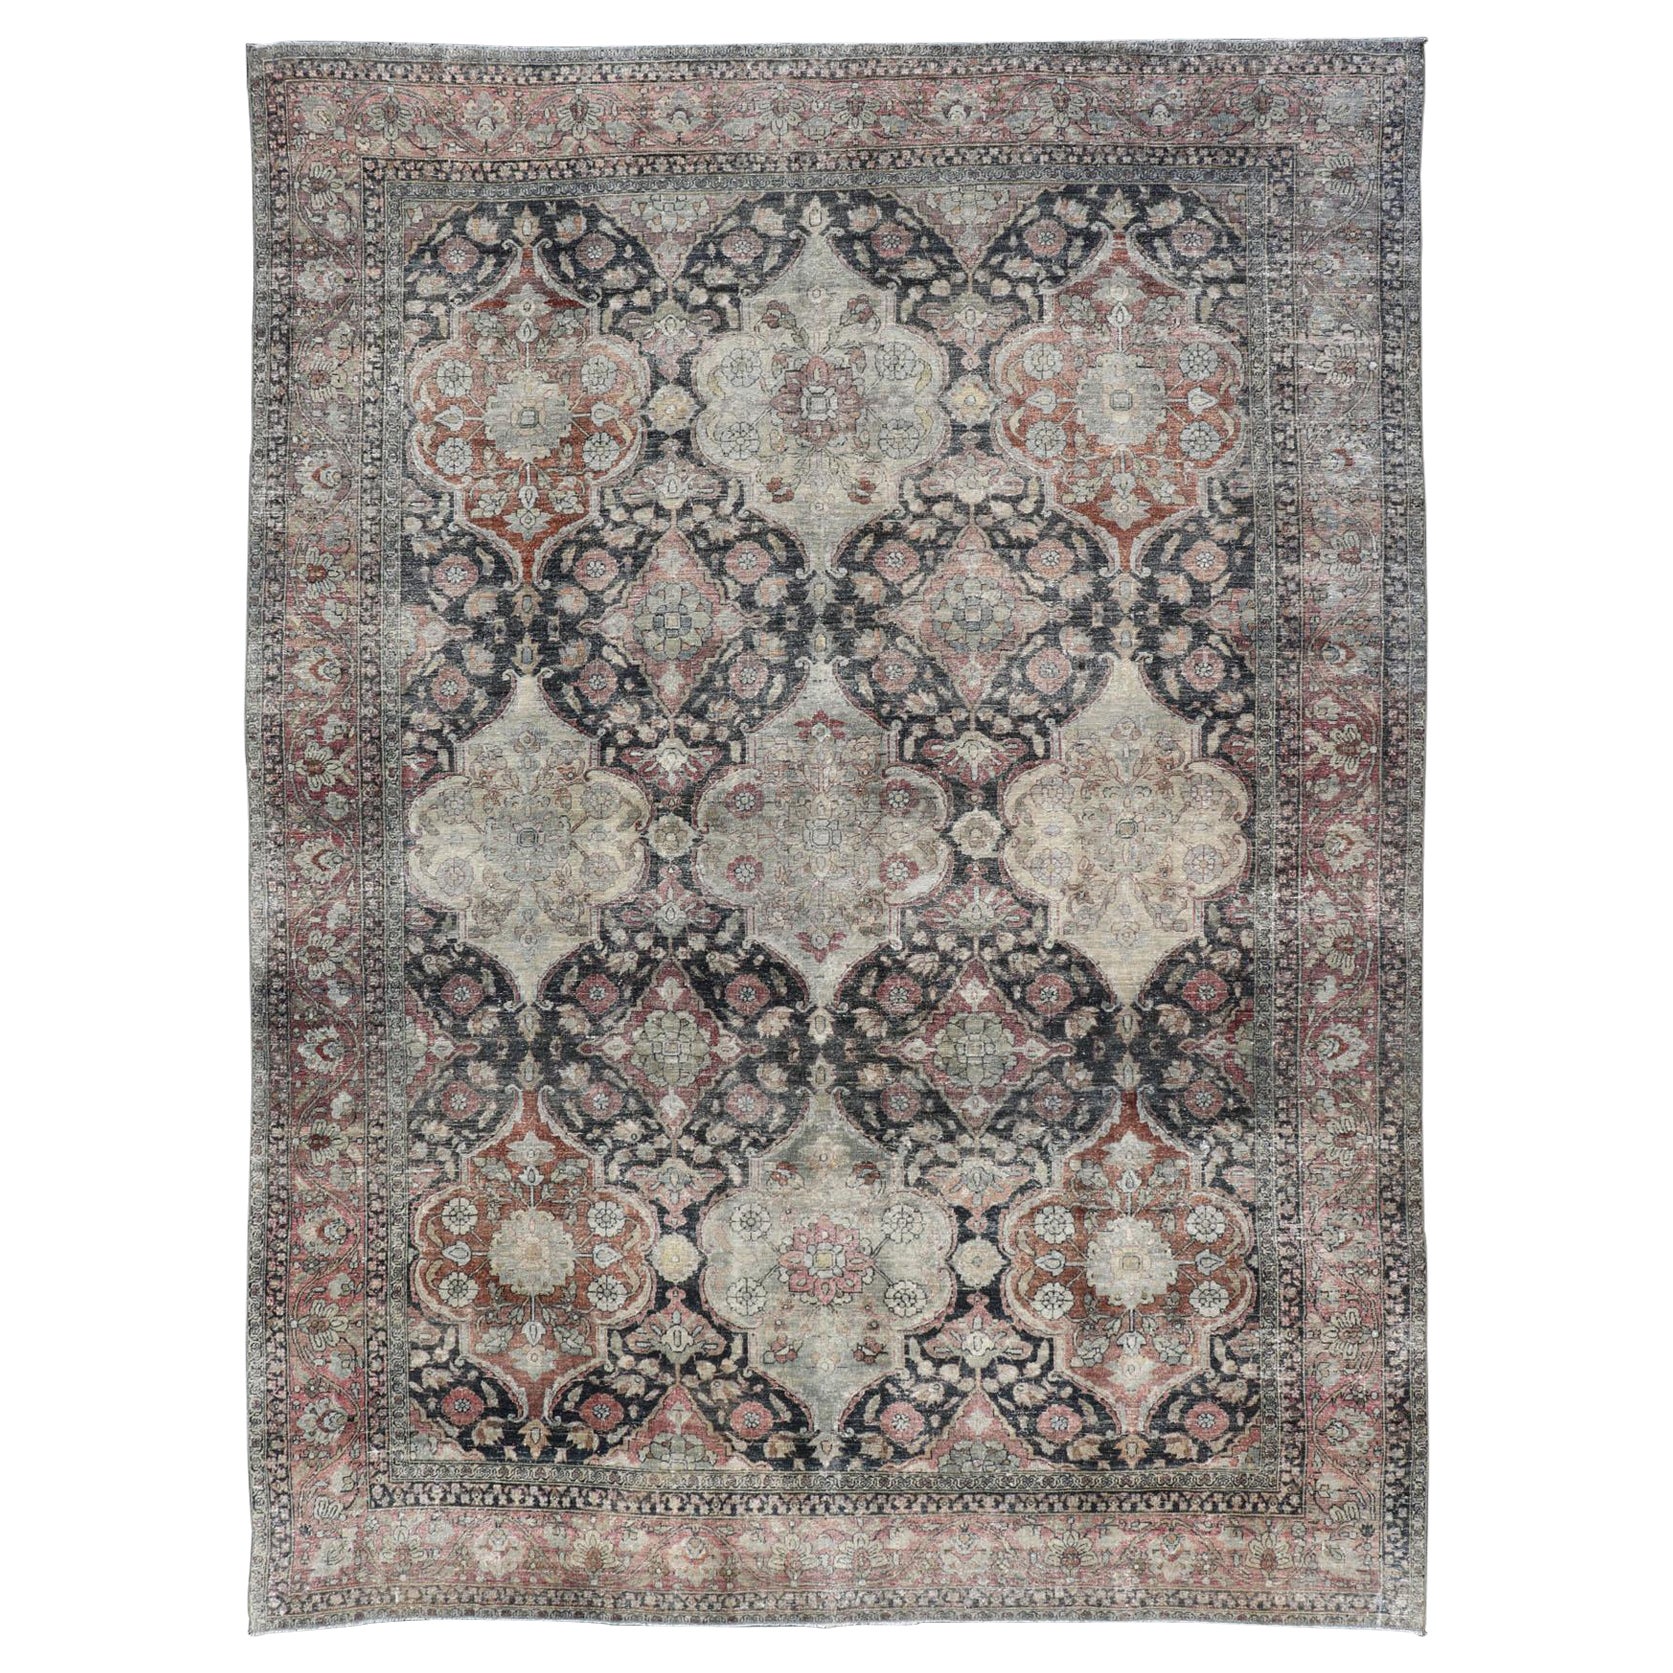 Antique Destressed Persian Yazd Rug in Charcoal, Copper, Warm Gray, Taupe & Rose For Sale